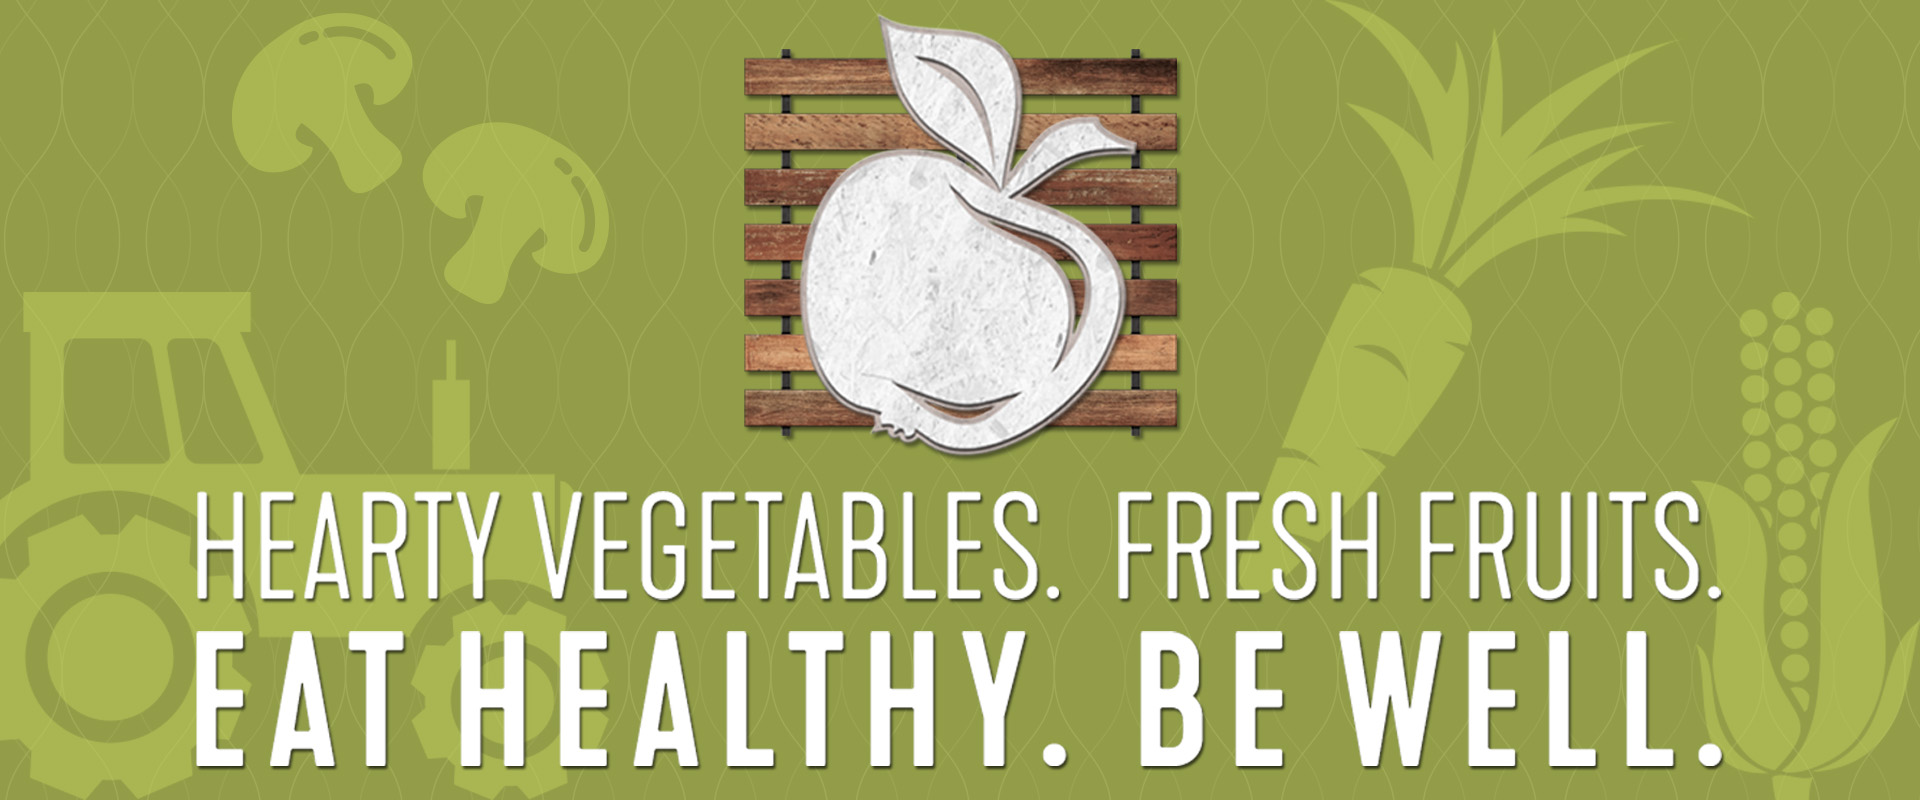 Hearty Vegetables. Fresh Fruits. Eat Healthy. Be Well.